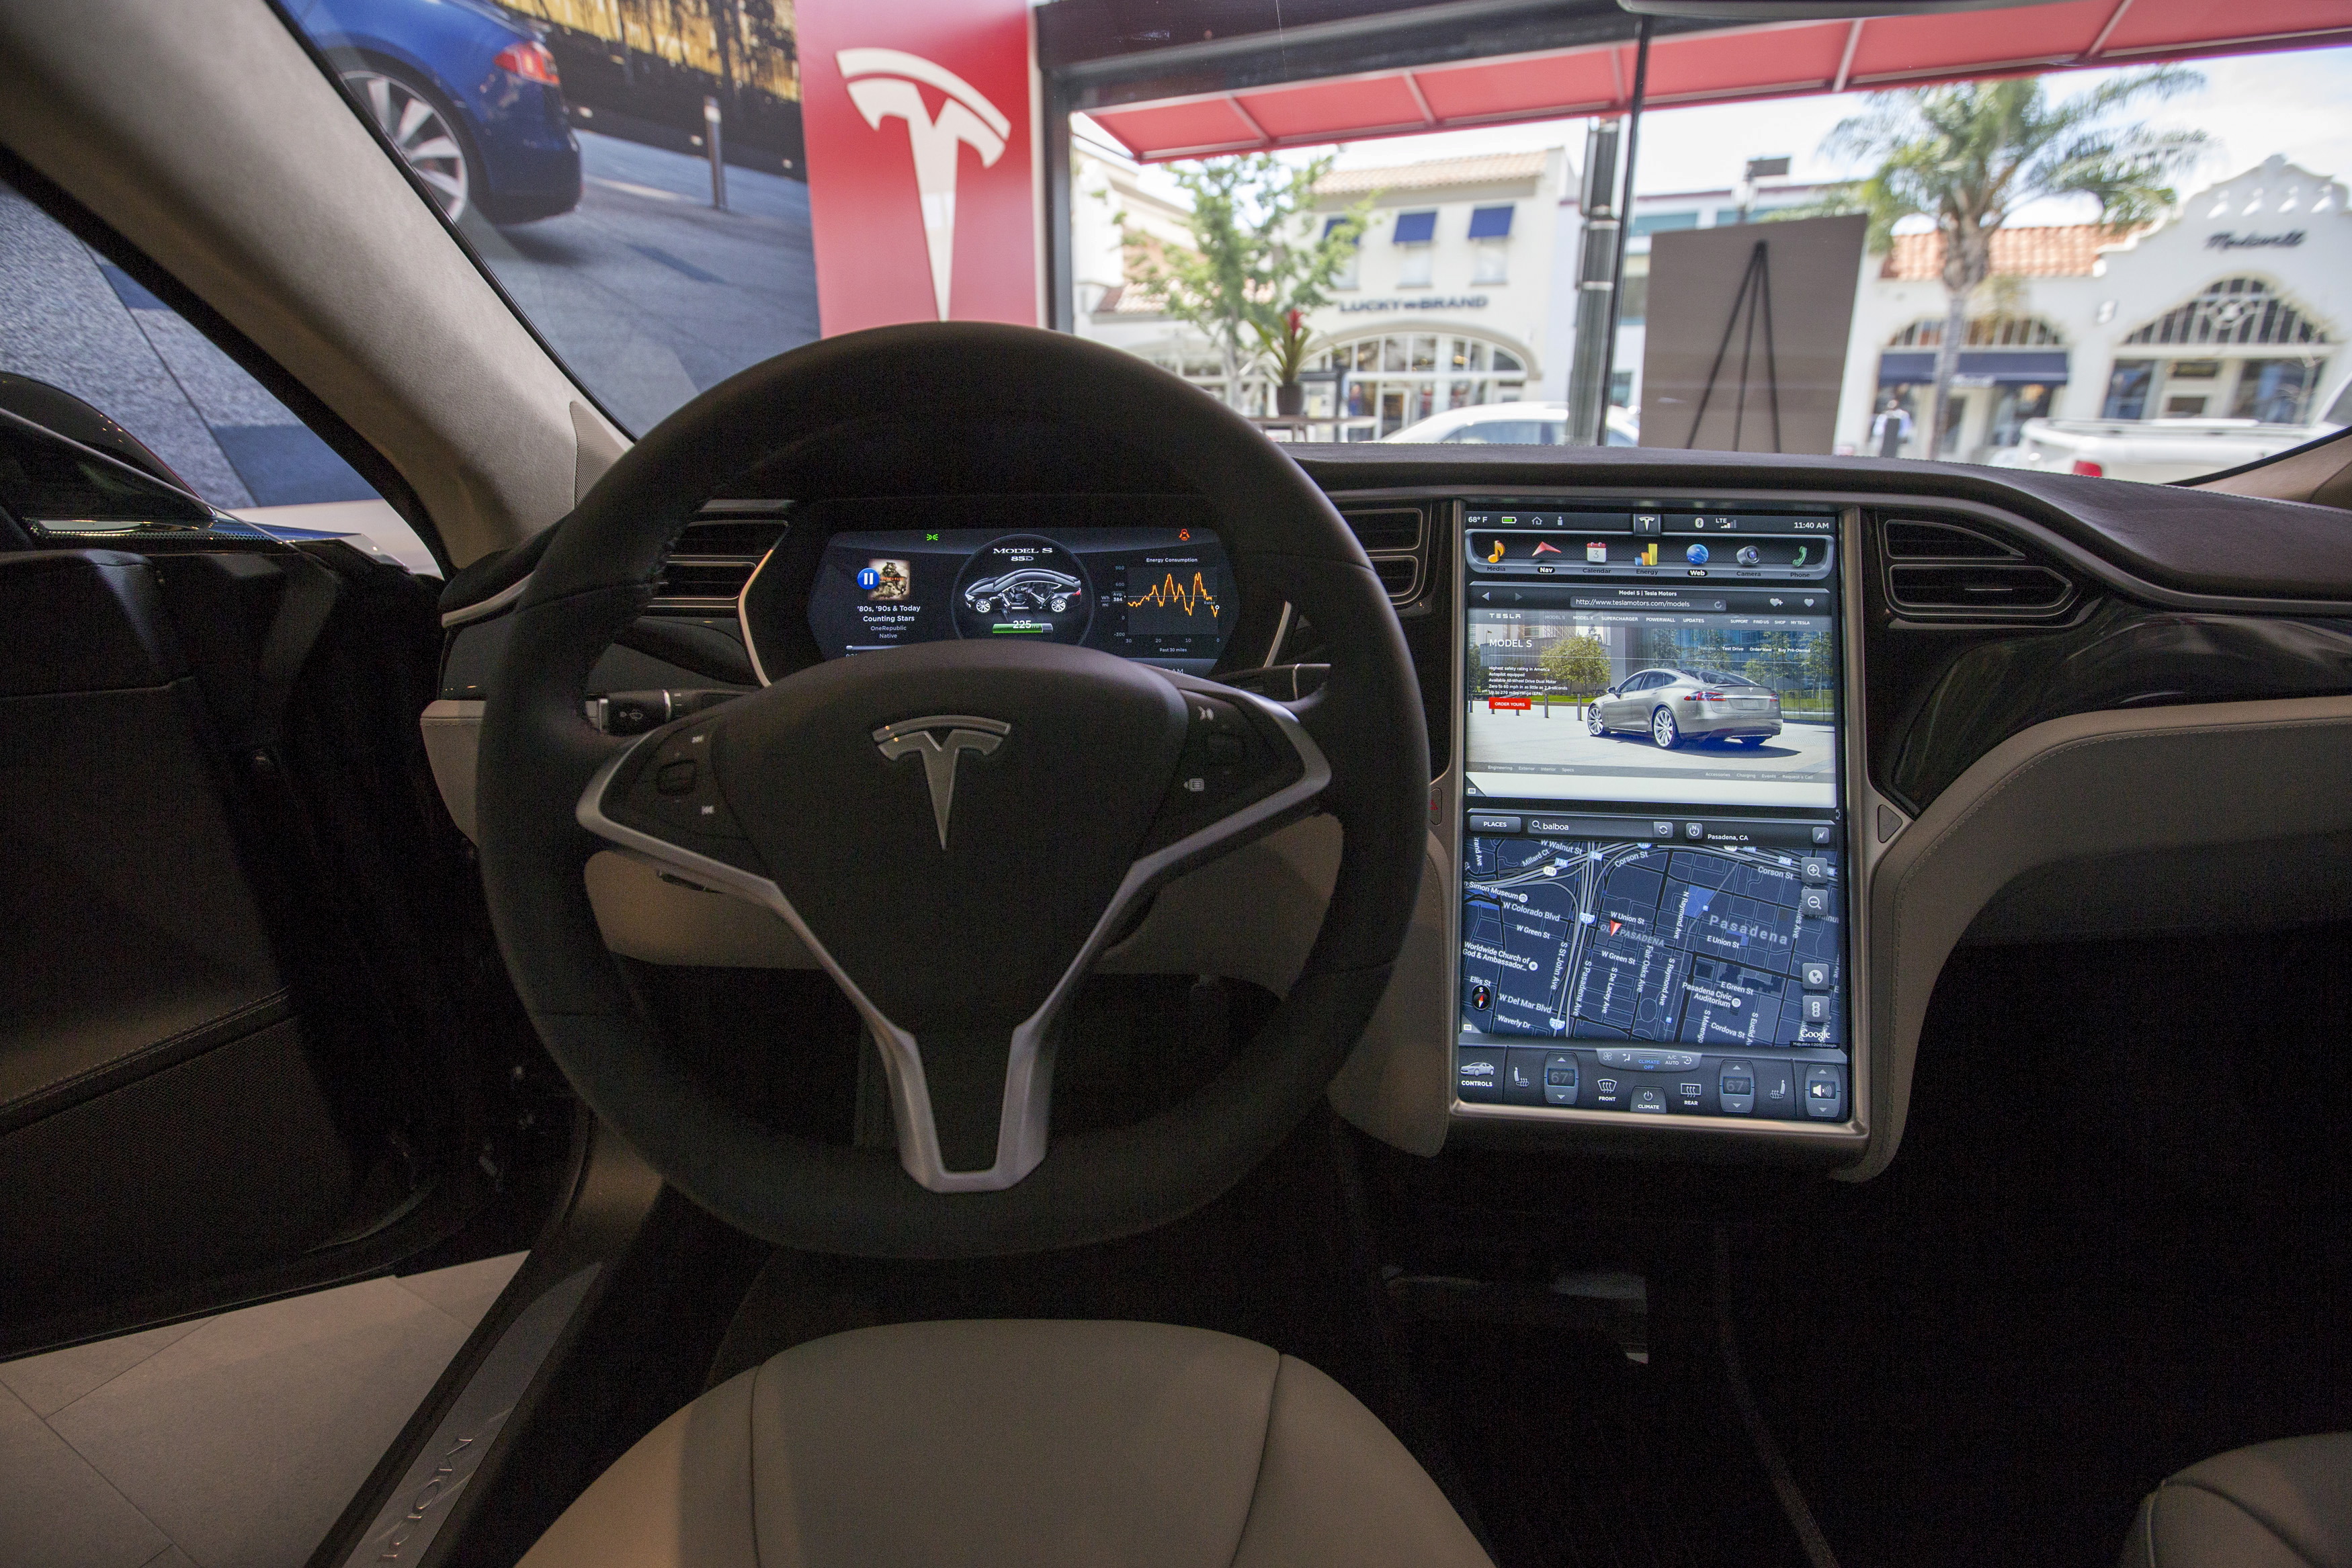 A view of the controls of a Tesla 85D on display at a Tesla showroom in Pasadena